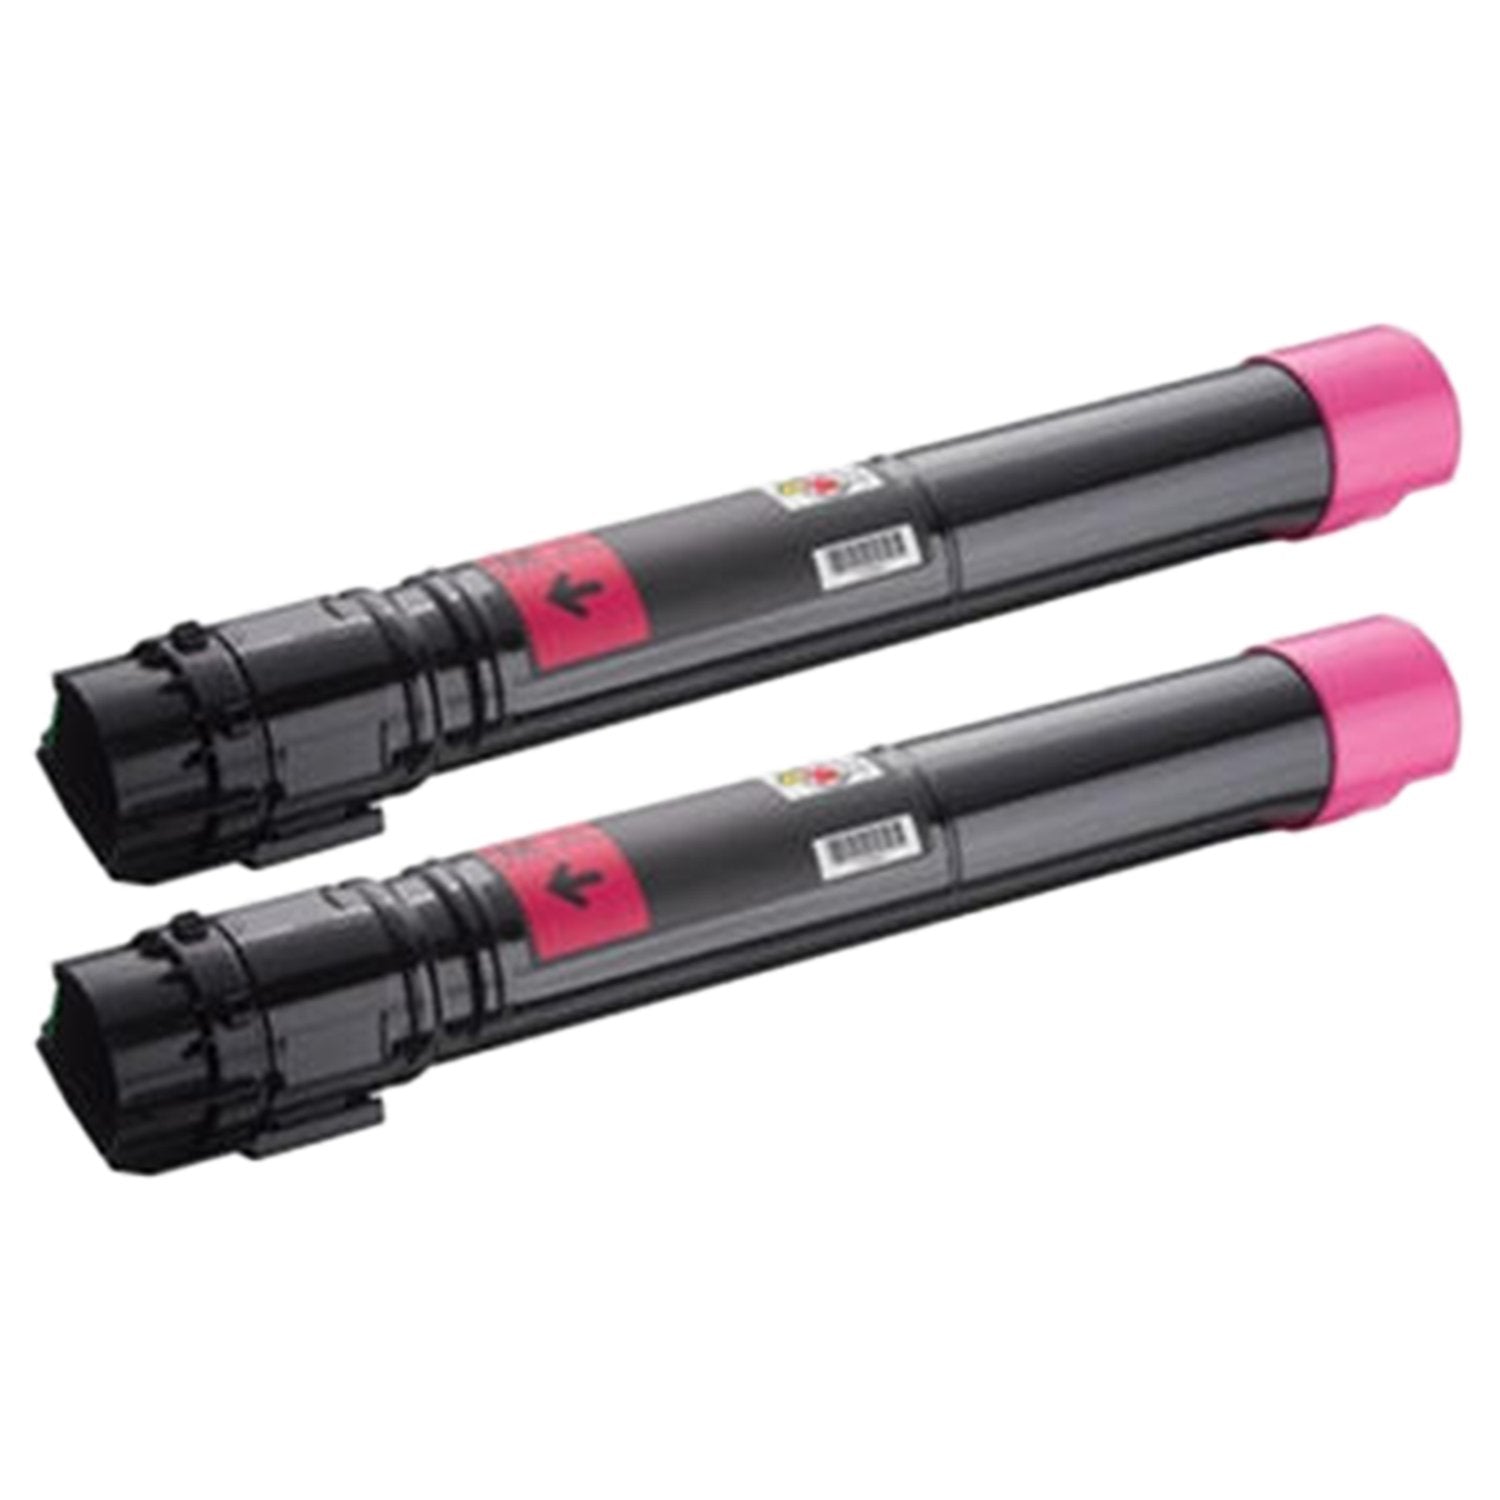 Absolute Toner Compatible Xerox 106R01567 Magenta High Yield Toner Cartridge | Absolute Toner Xerox Toner Cartridges